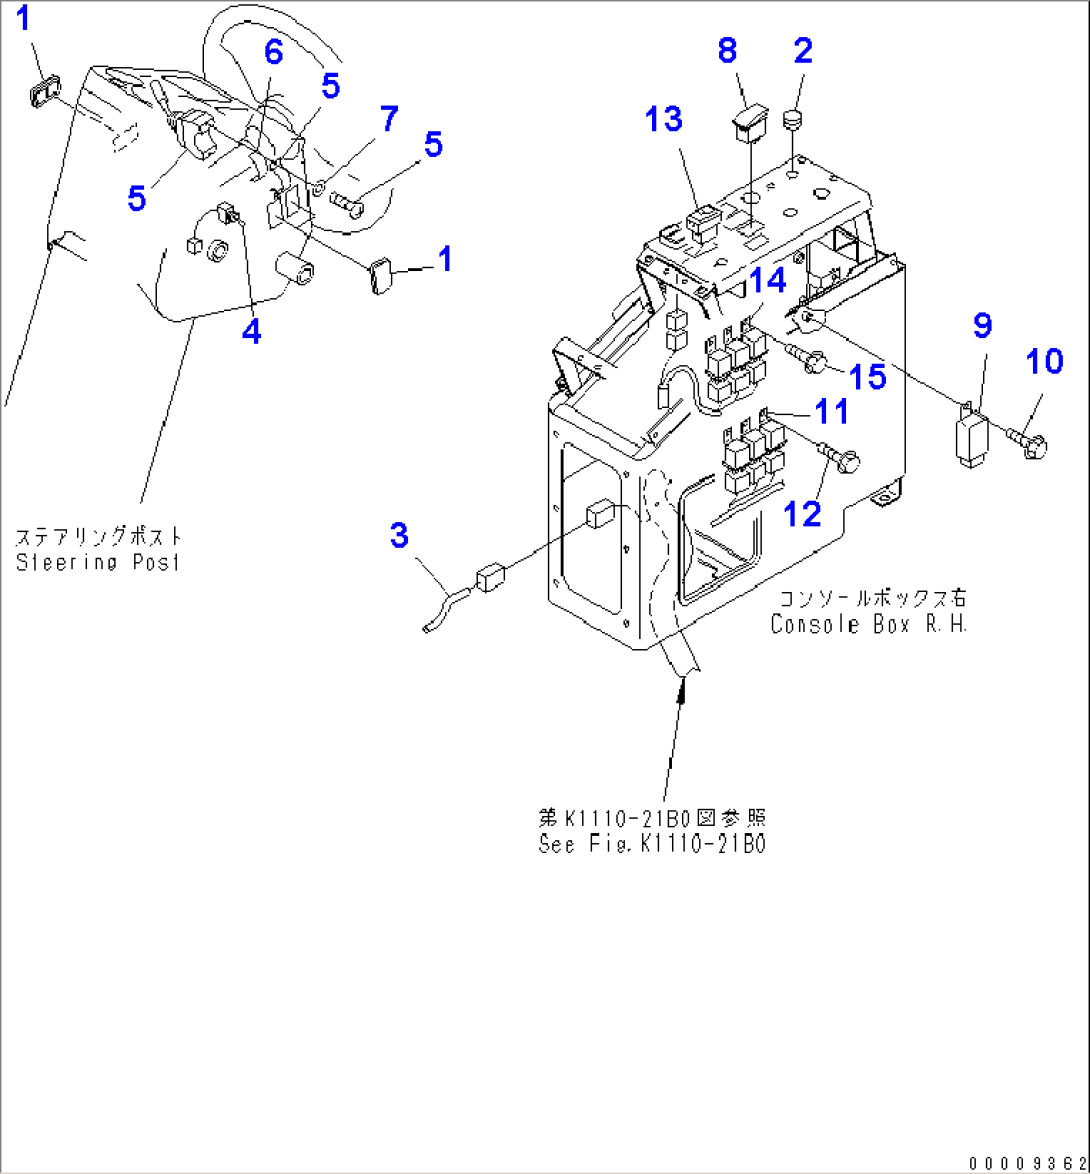 ELECTRICAL SYSTEM (STEERING POST AND R.H. CONSOLE BOX) (WITH AIR CONDITIONER)(#51001-)